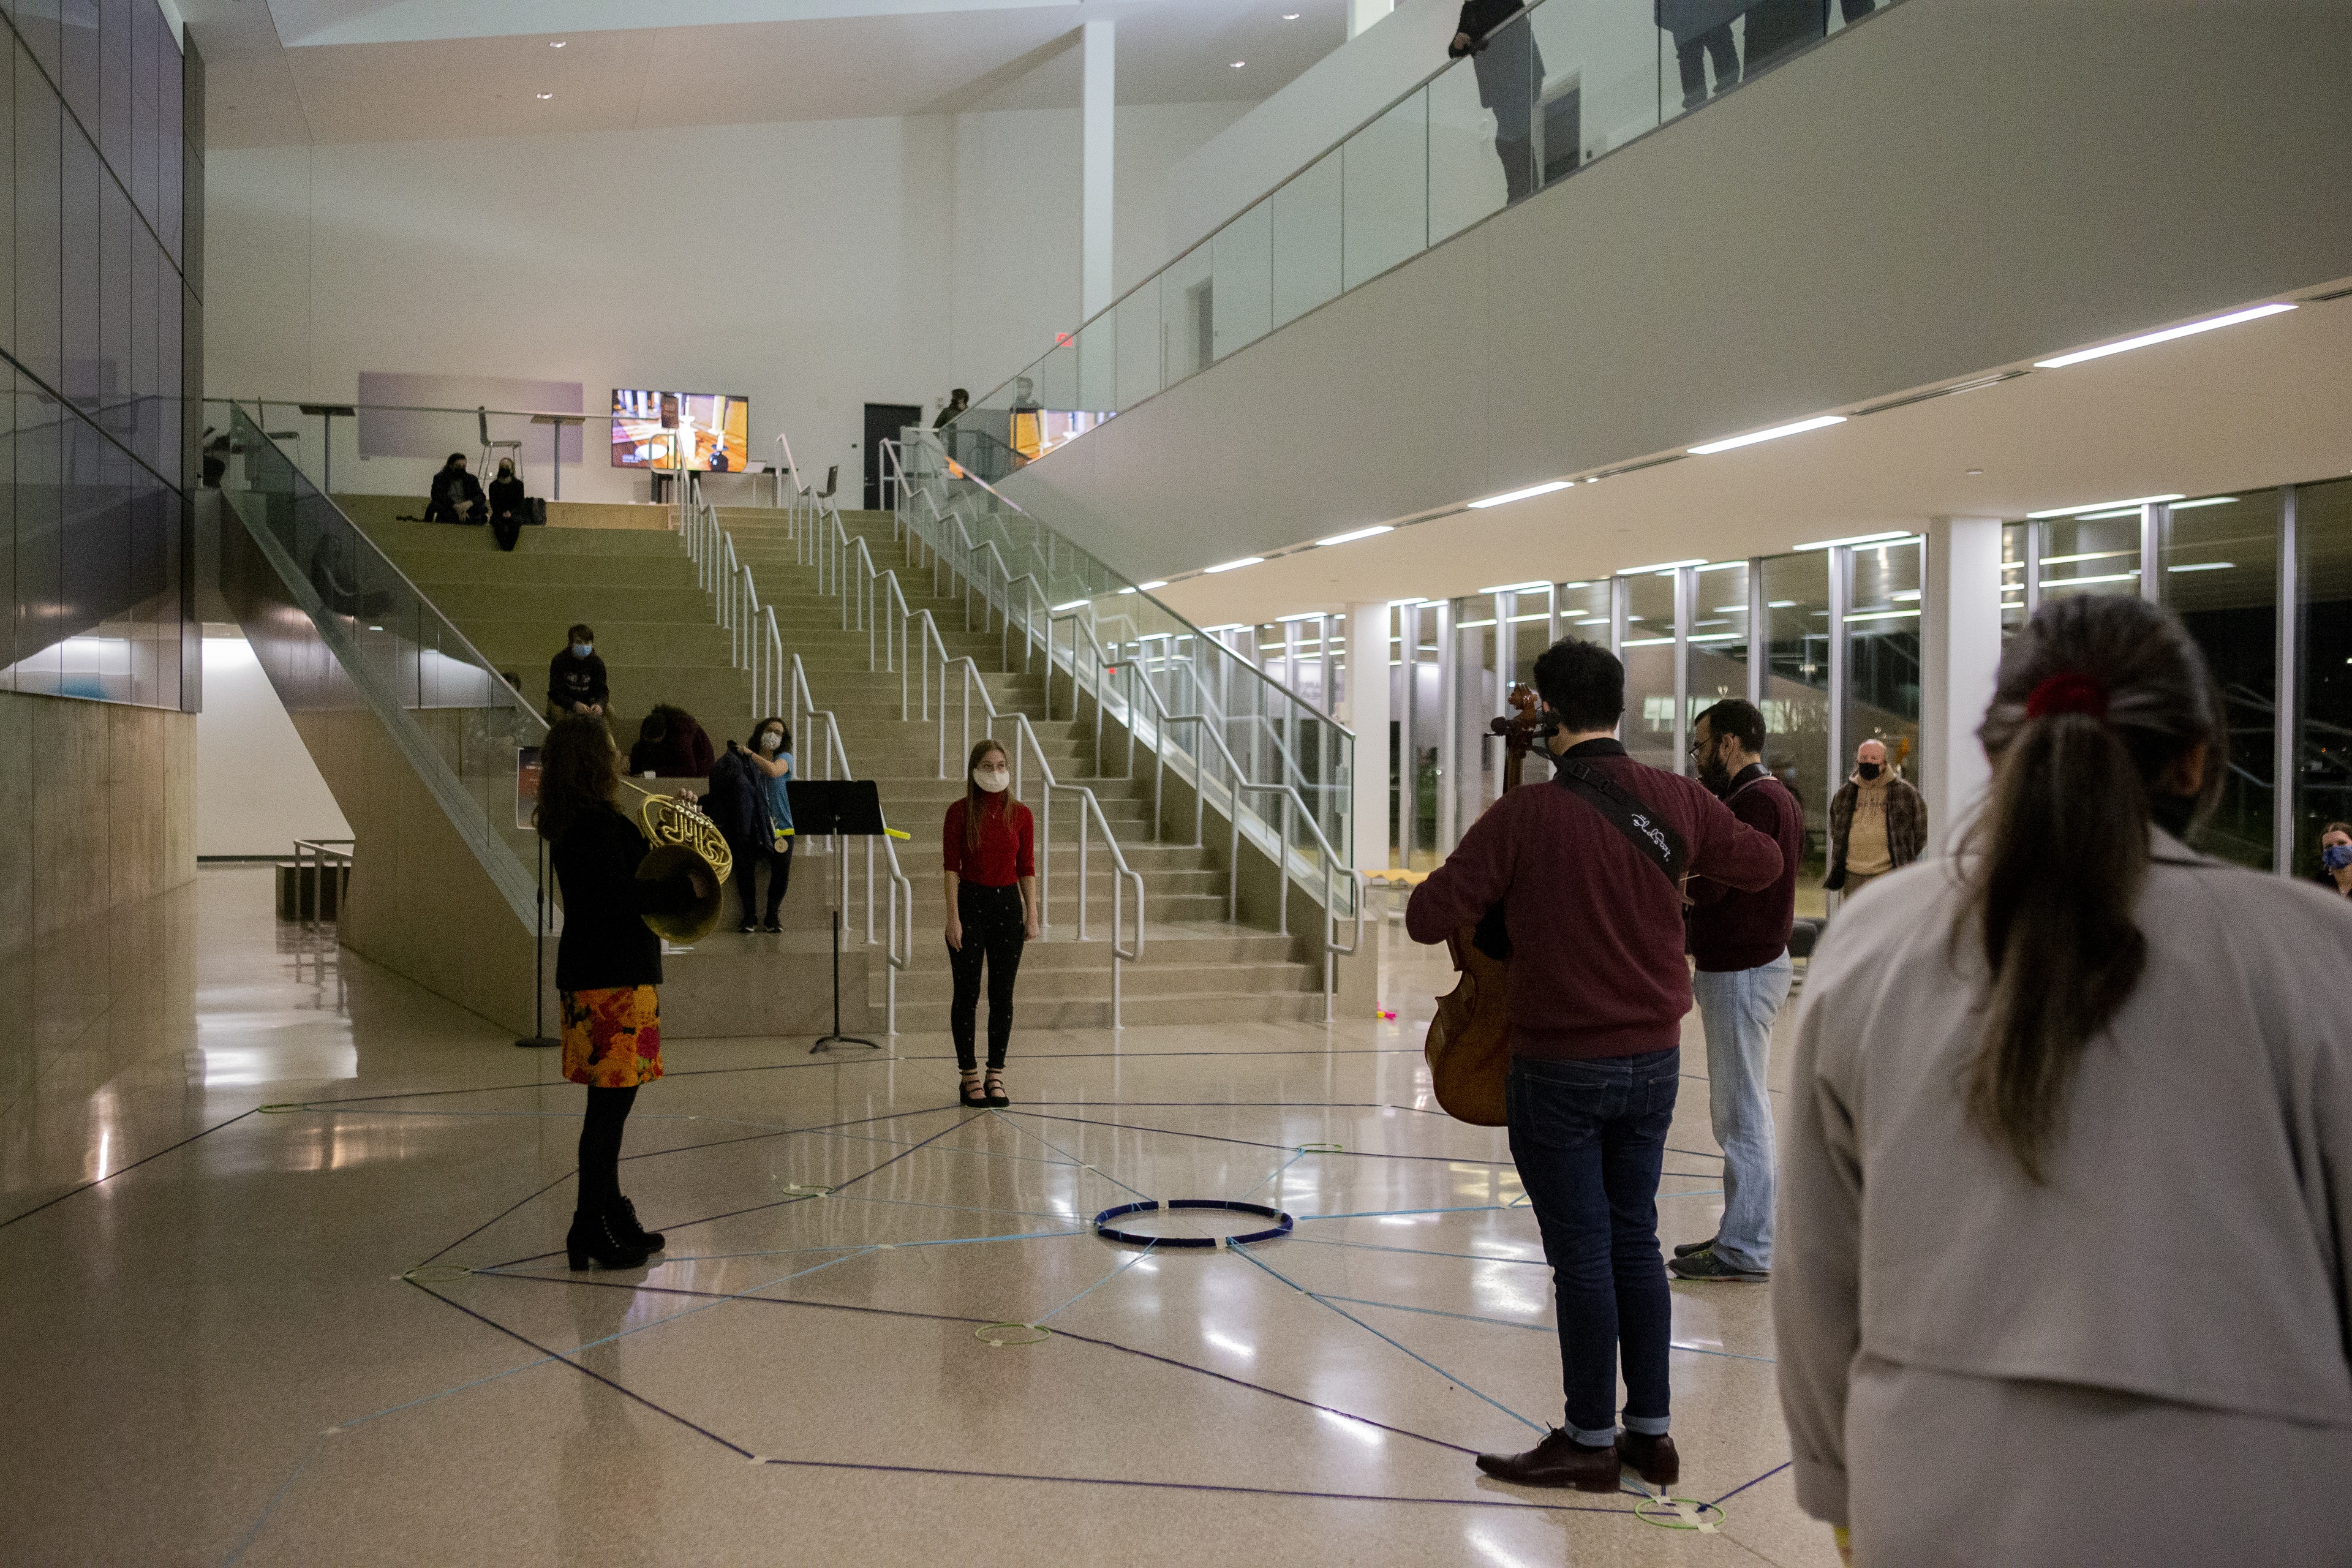 Artists perform in the foyer of the Wolfe Center For The Arts